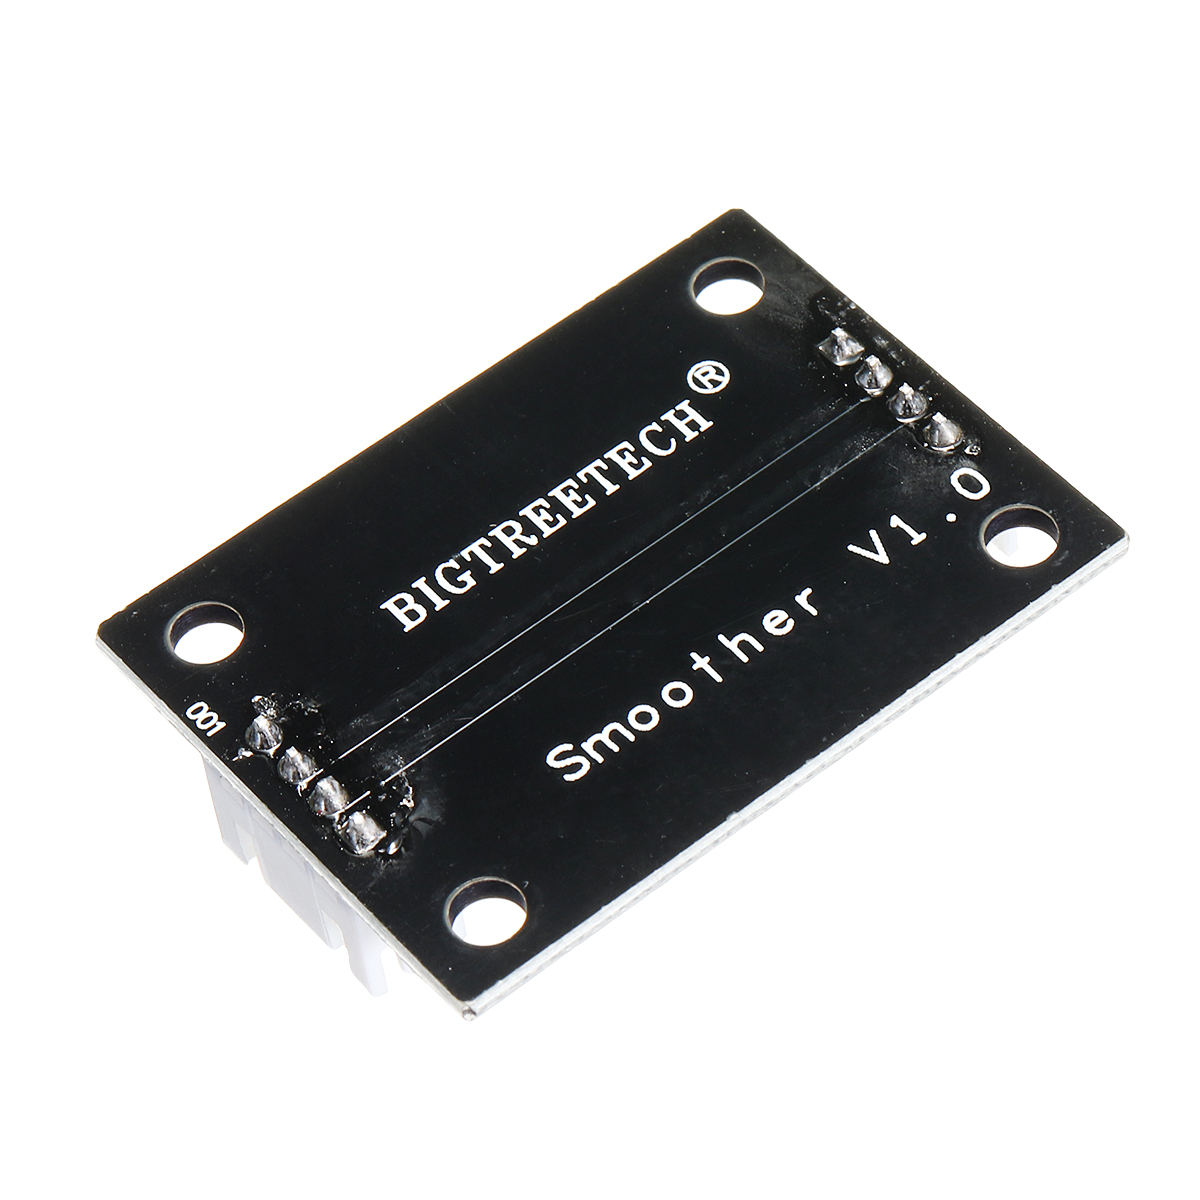 5PCS TL-Smoother Addon Module With Dupont Line For 3D Printer Stepper Motor 11